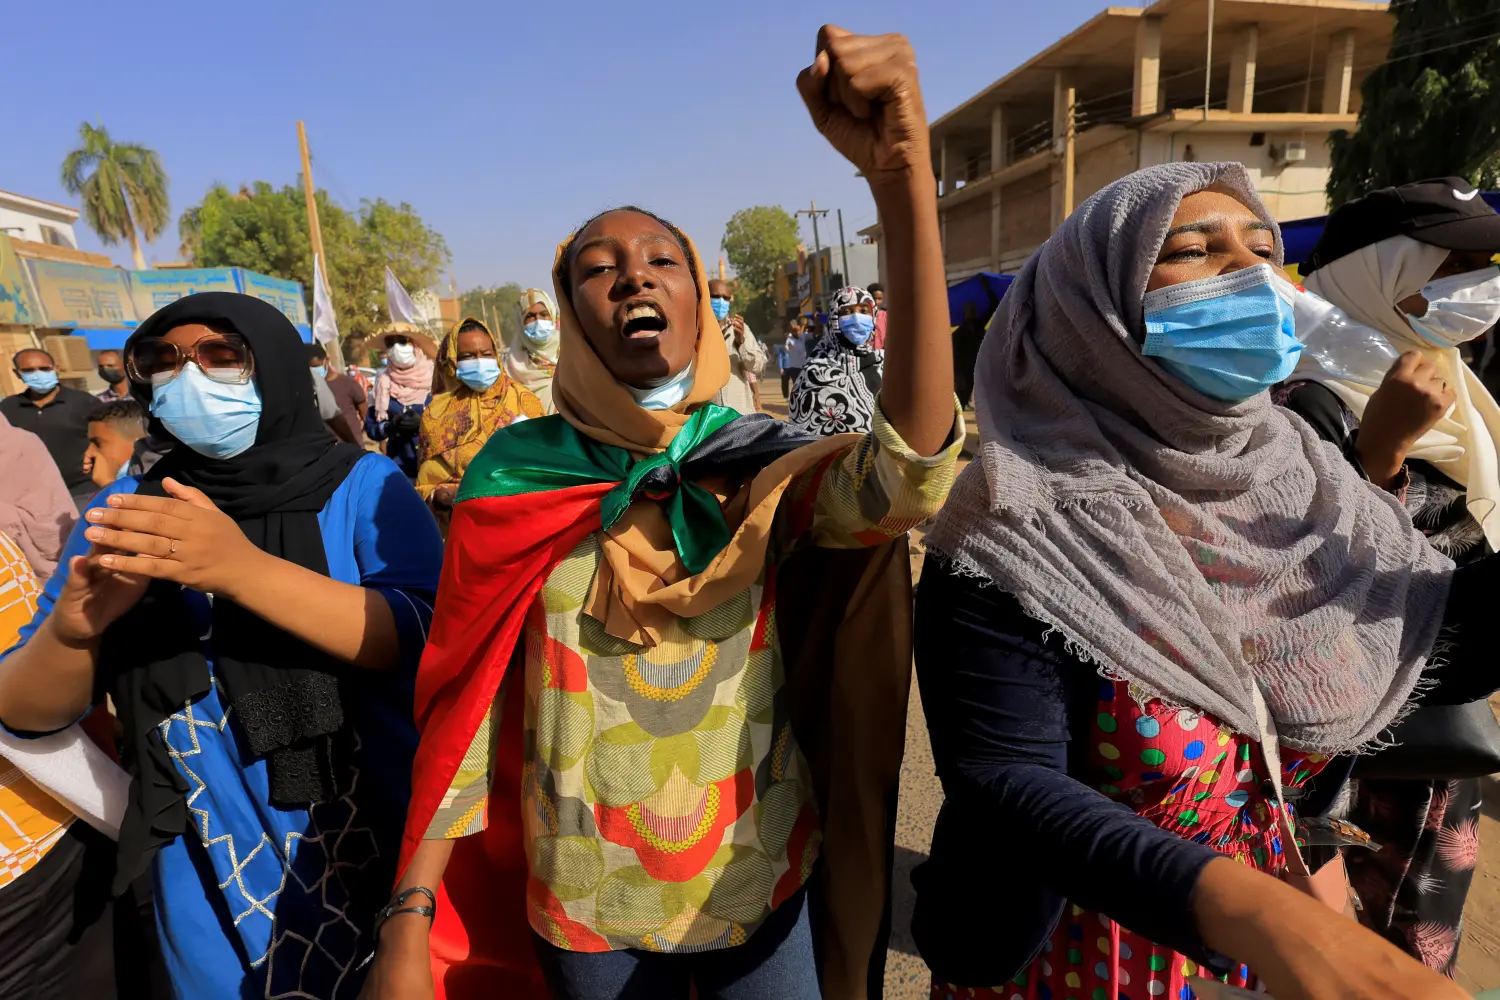 Protesters march during a rally from Khartoum North to Omdurman against military rule following last month's coup, in Khartoum, Sudan. December 13,2021. REUTERS/Mohamed Nureldin Abdallah